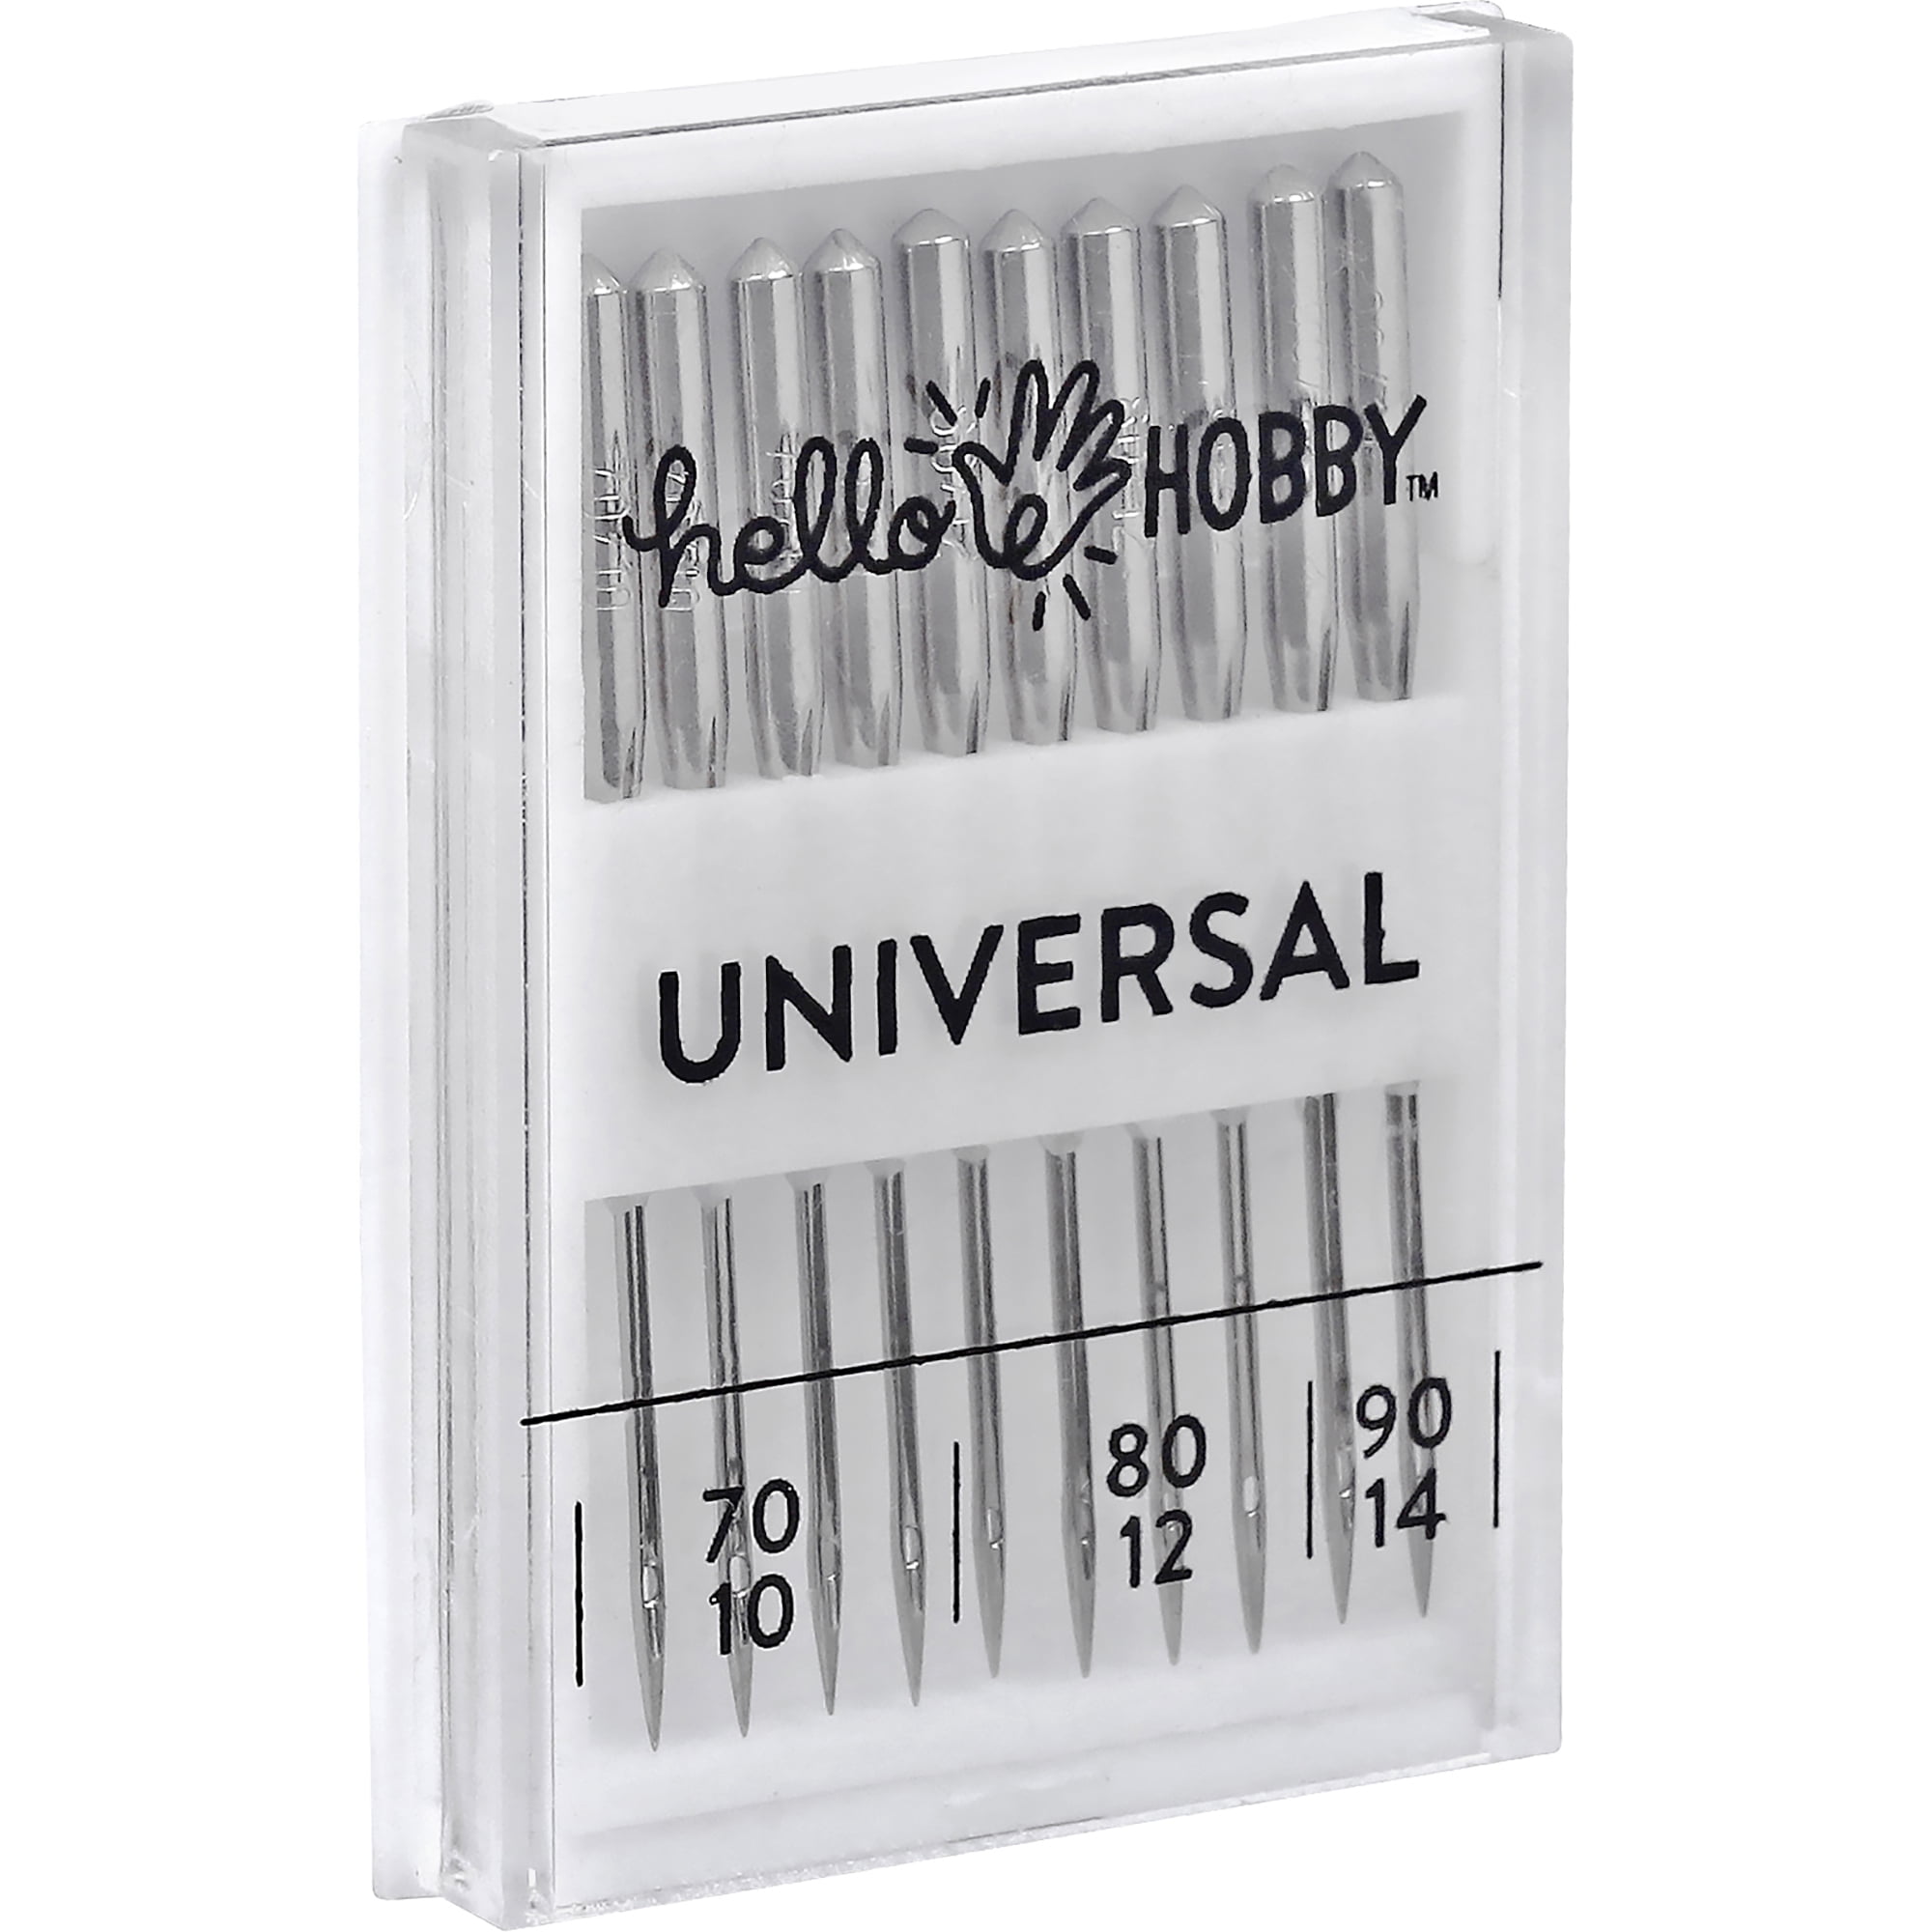 Hello Hobby Size 75/11 Embroidery Sewing Machine Needles (5 Pack)